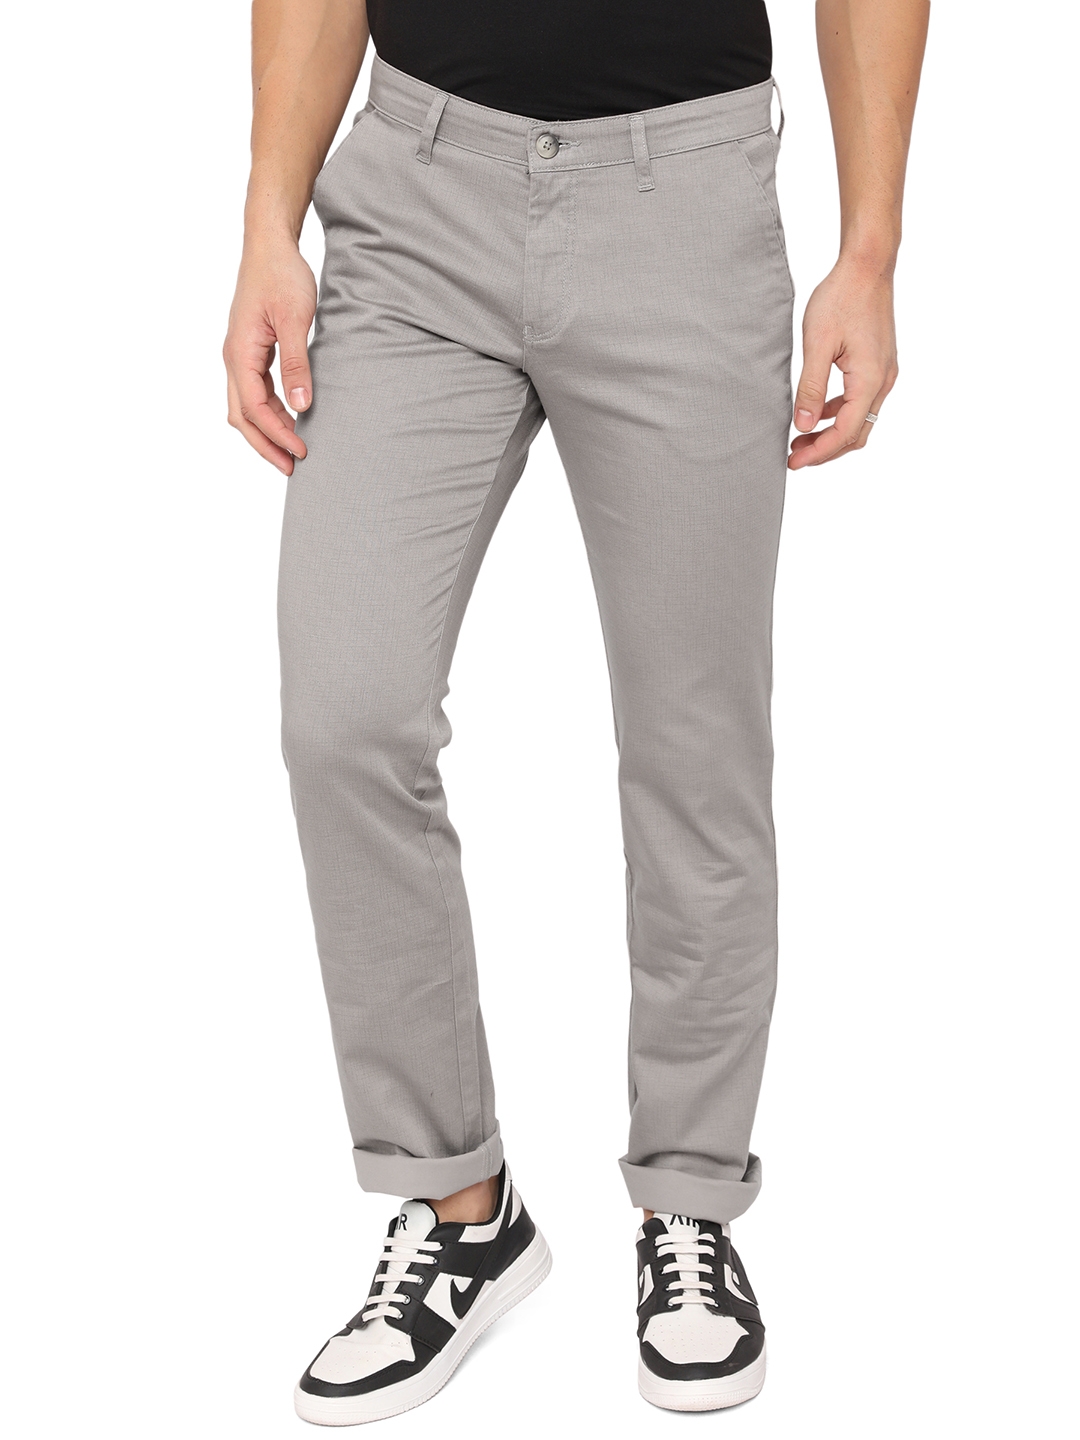 Greenfibre | Light Grey Washed Slim Fit Casual Trouser | Greenfibre